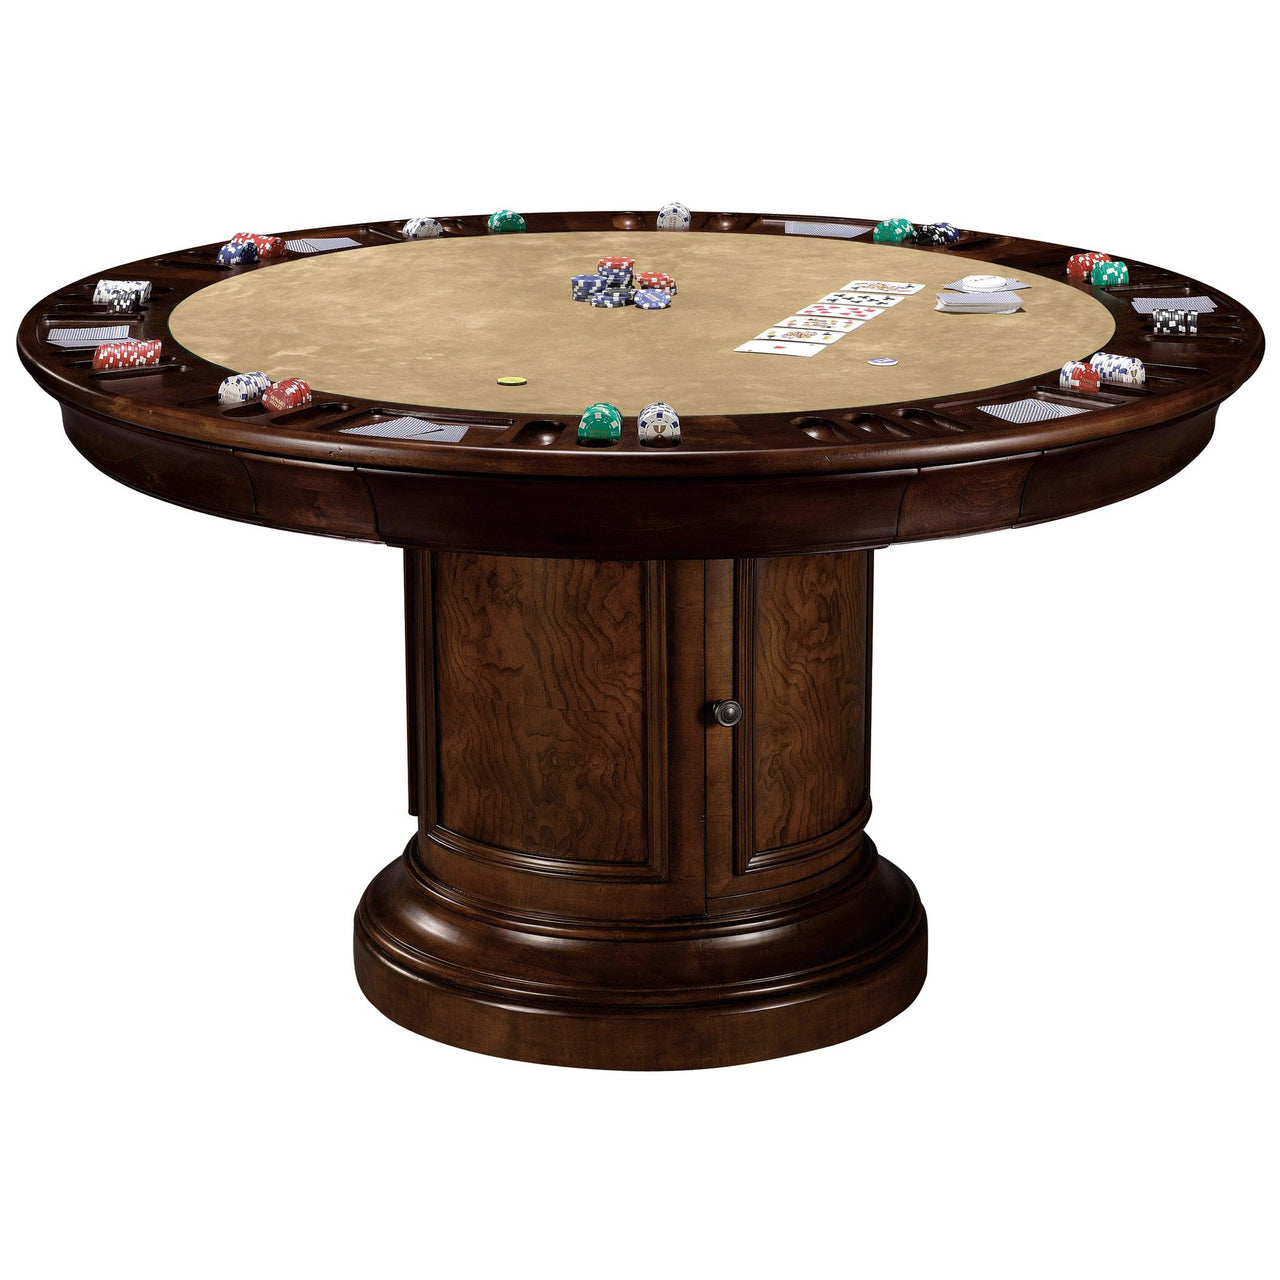 Howard Miller Ithaca poker and dining table, convertible-AMERICANA-POKER-TABLES